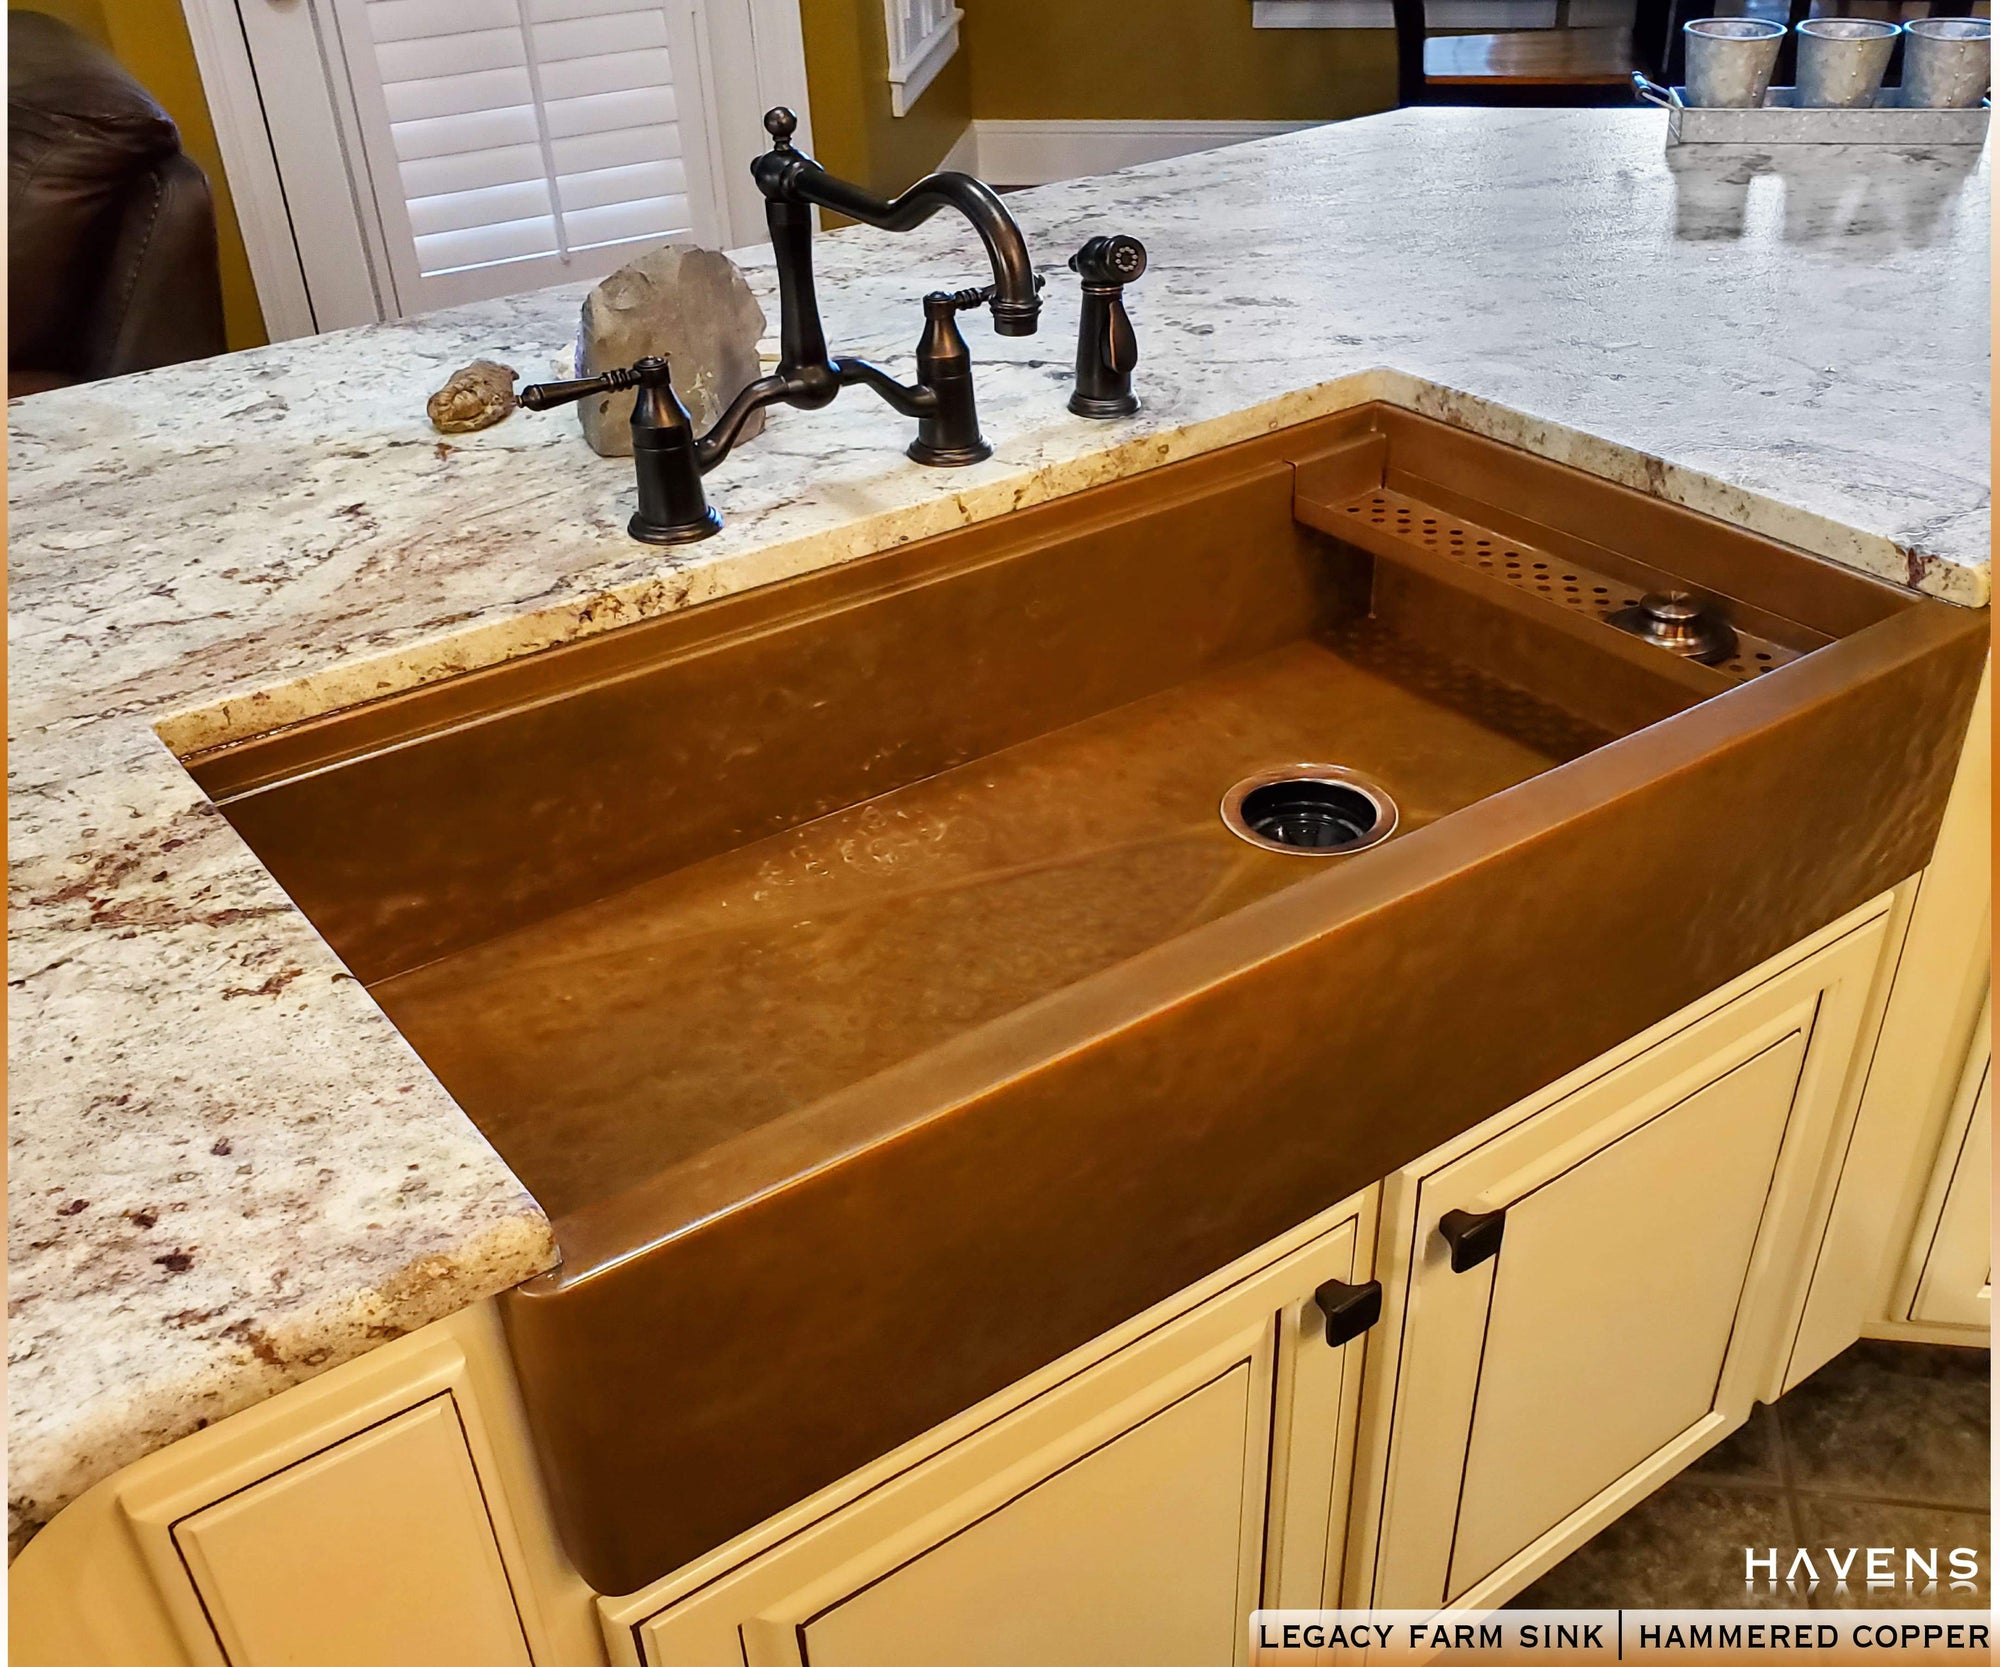 Legacy Farmhouse Sink - Micro-Hammered Copper